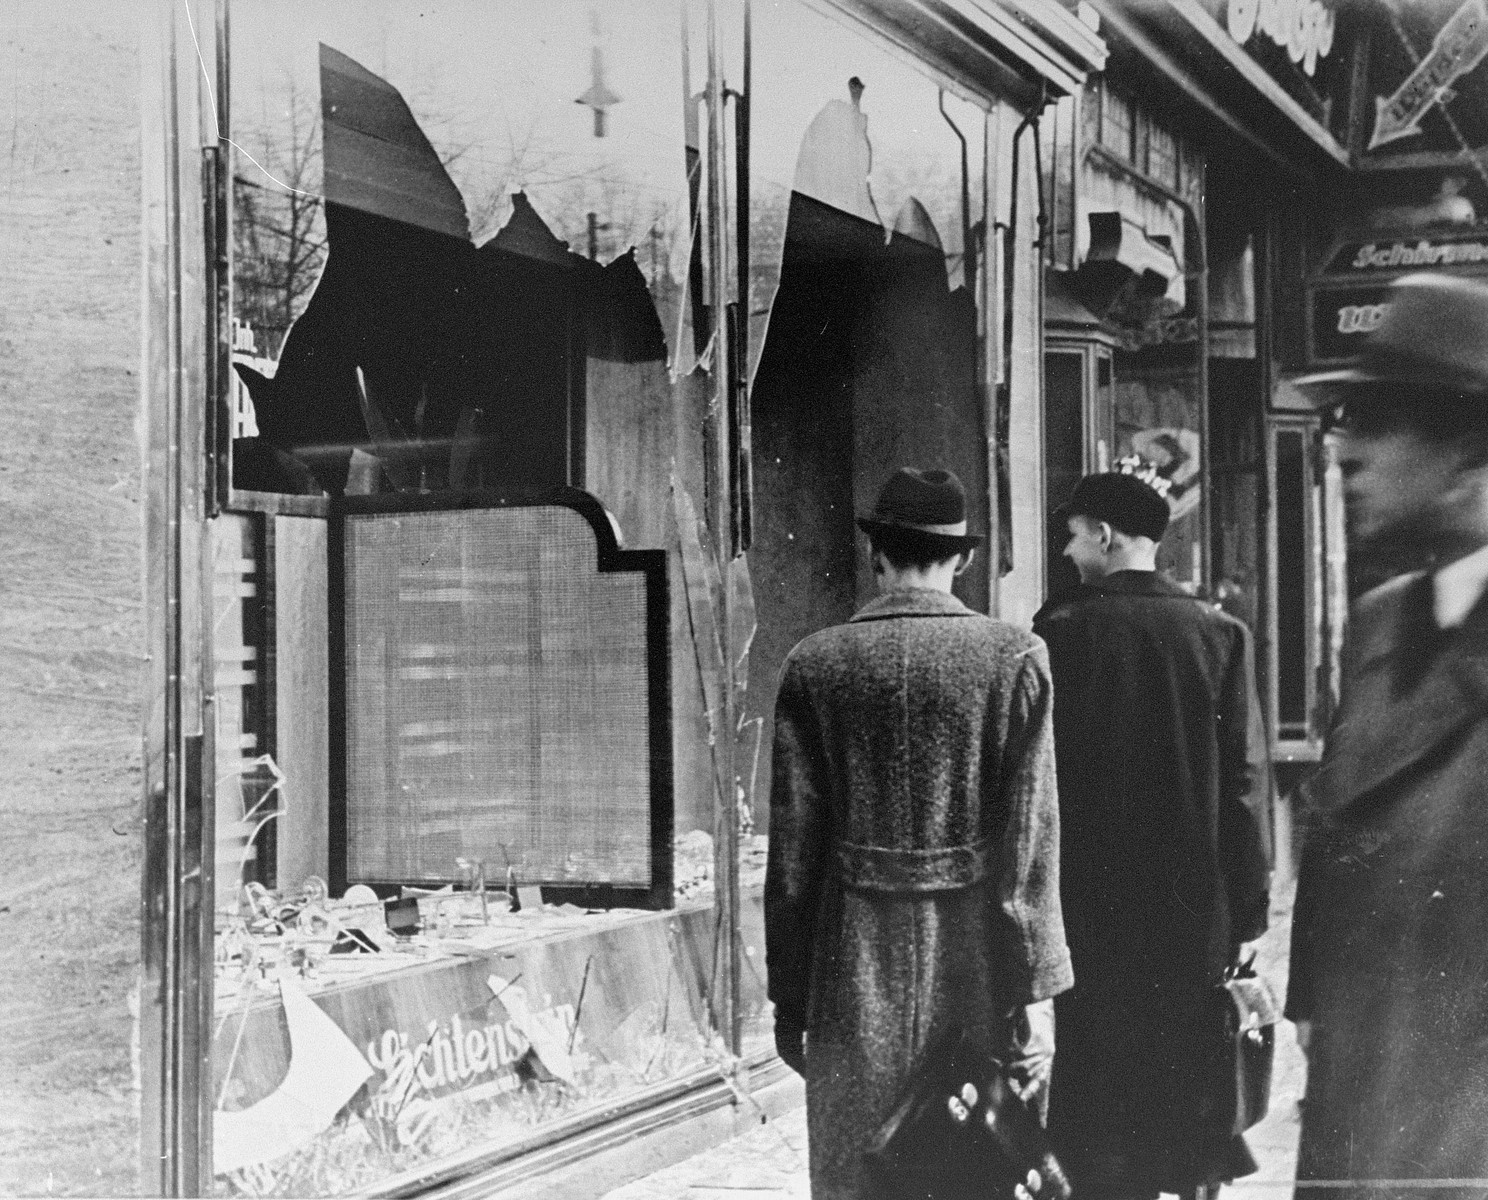 A Jewish-owned business vandalized during Kristallnacht, 11 Nov 1938